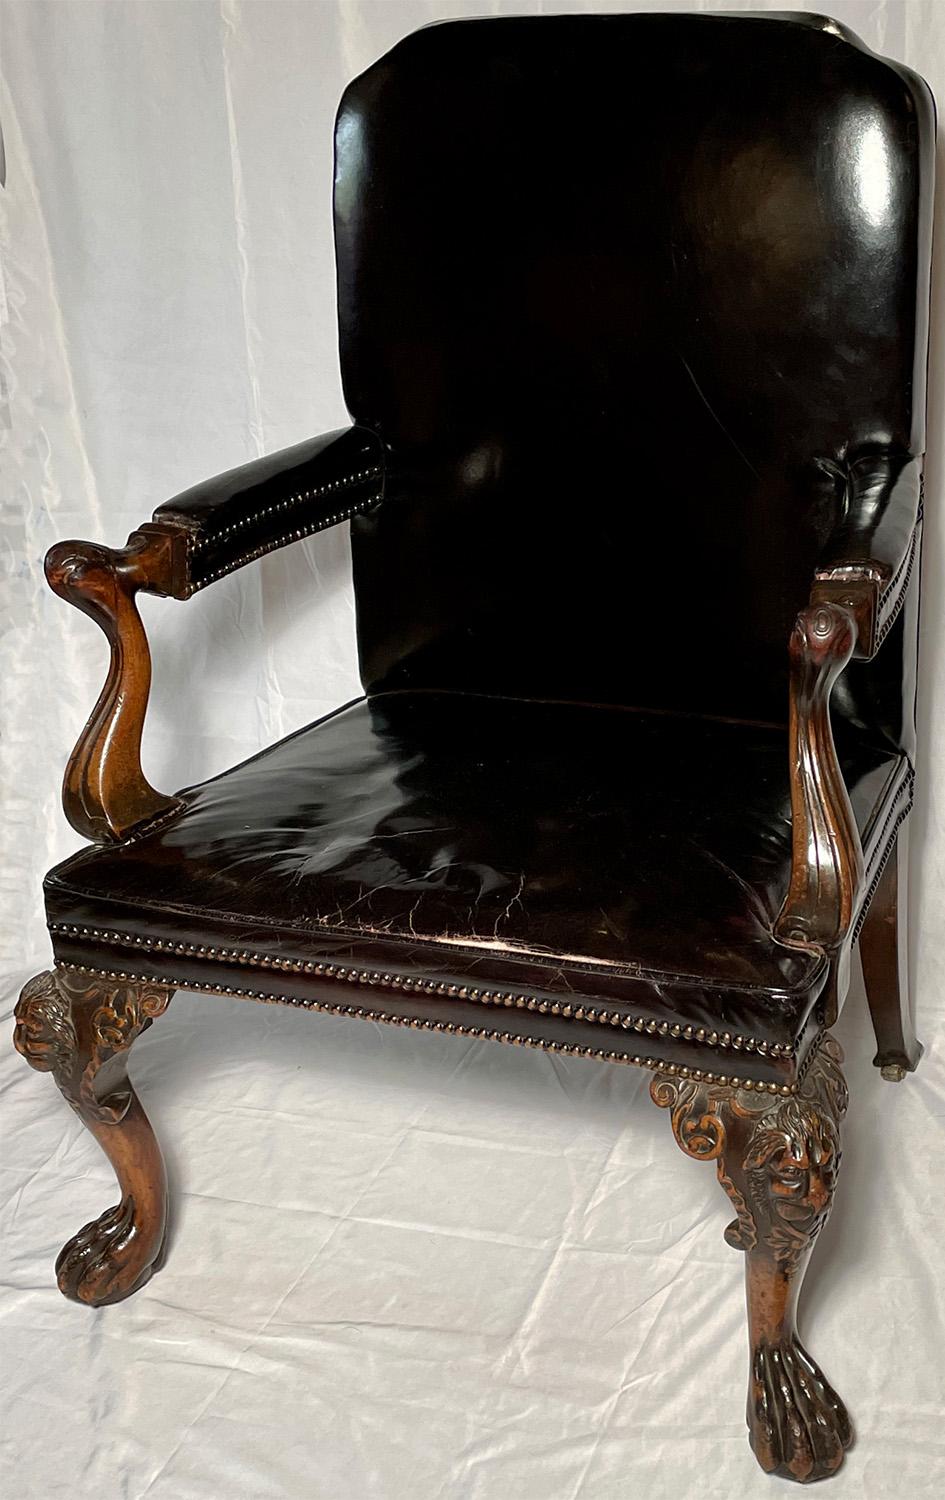 Antique Irish chippendale carved armchair with leather upholstery, circa 1840.